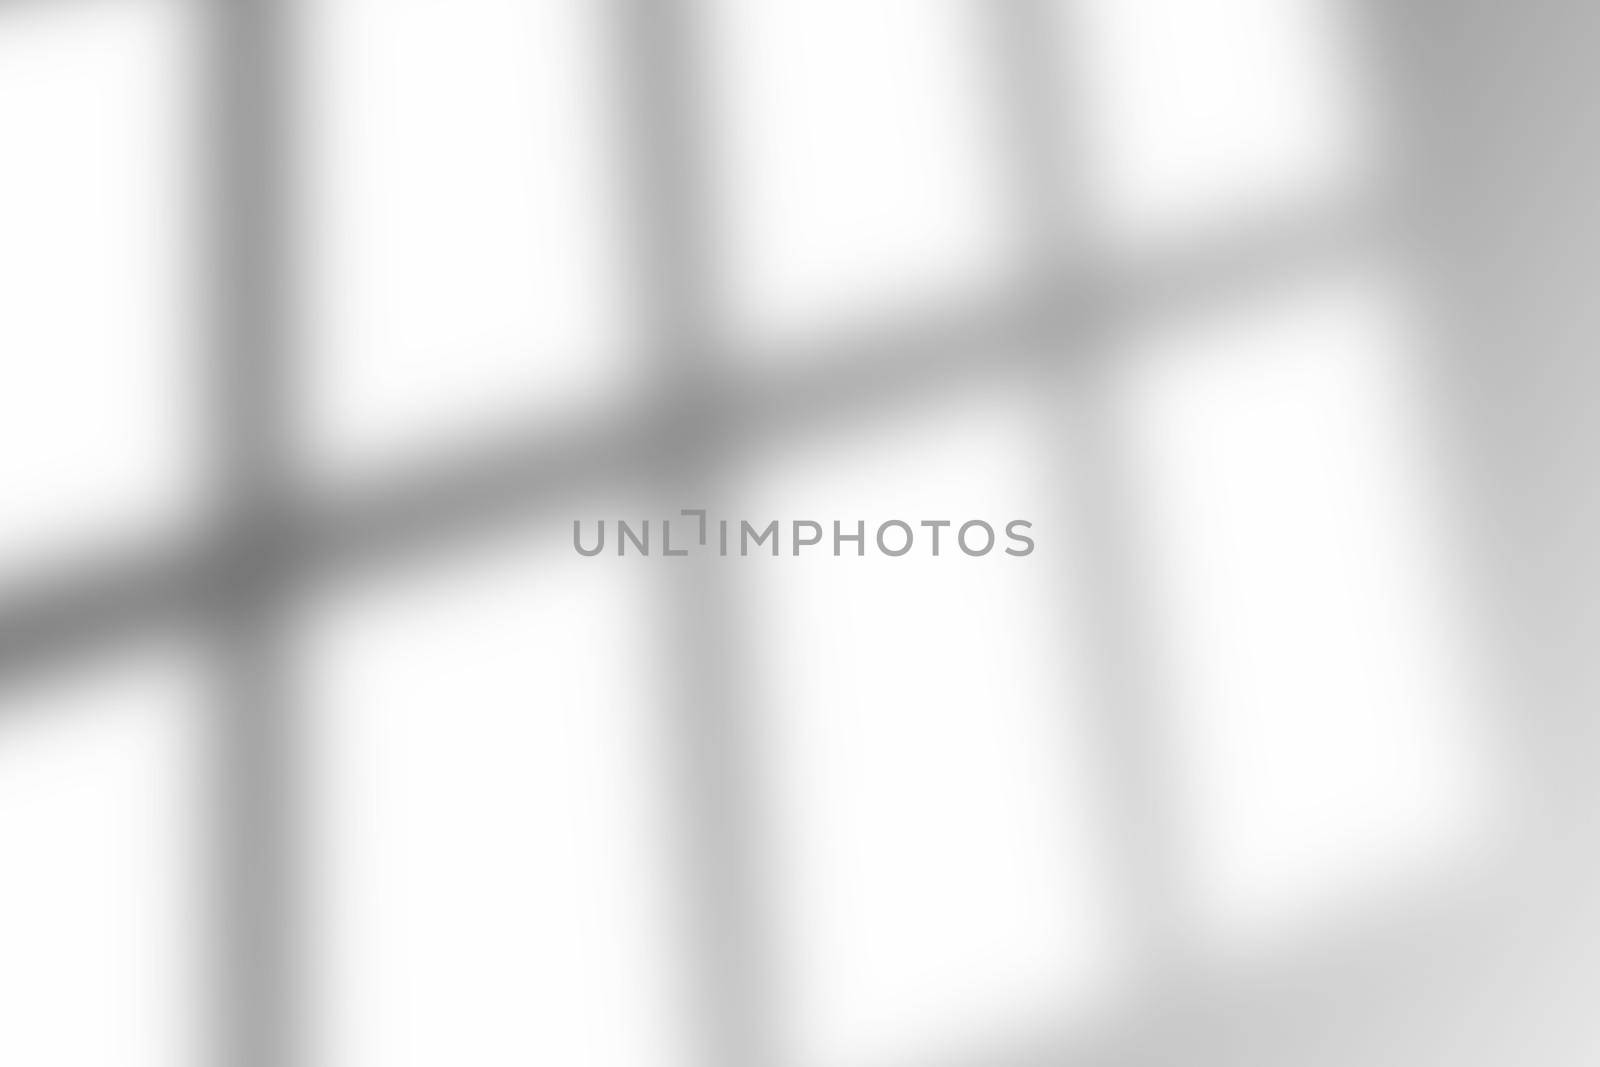 Shadow of window overlay on white texture background. Use for decorative product presentation.